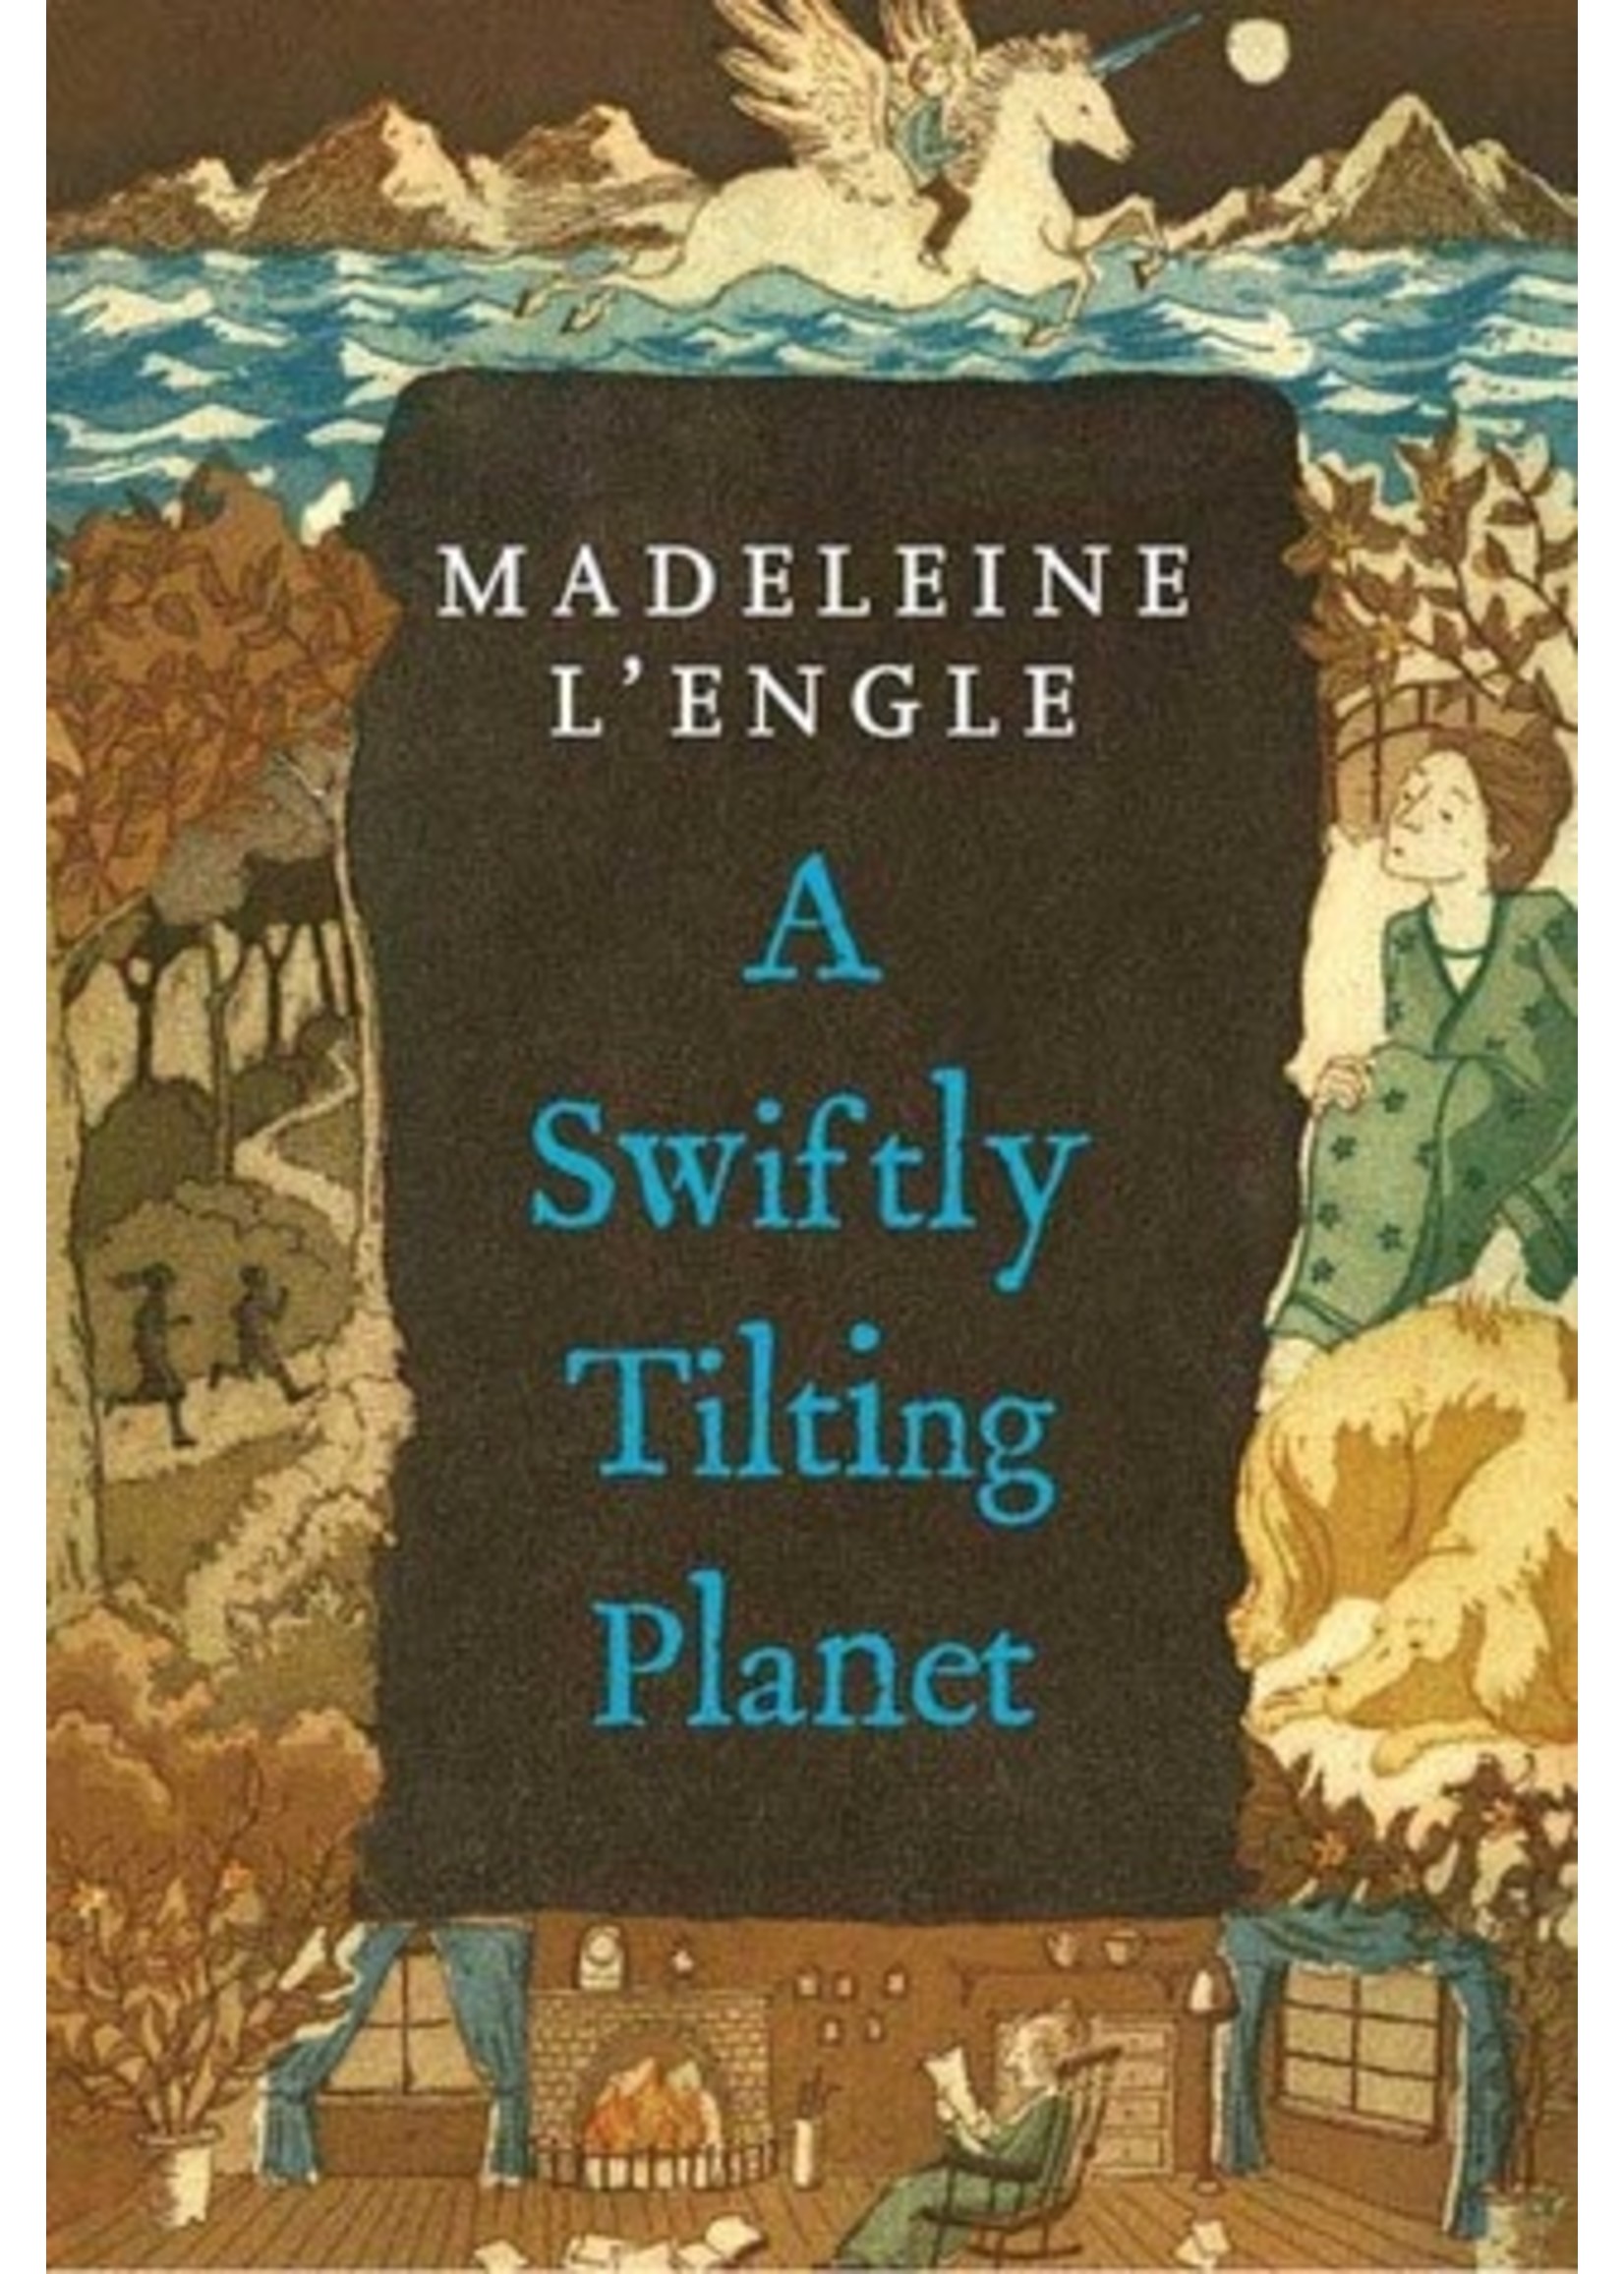 A Swiftly Tilting Planet (Time Quintet #3) by Madeleine L'Engle